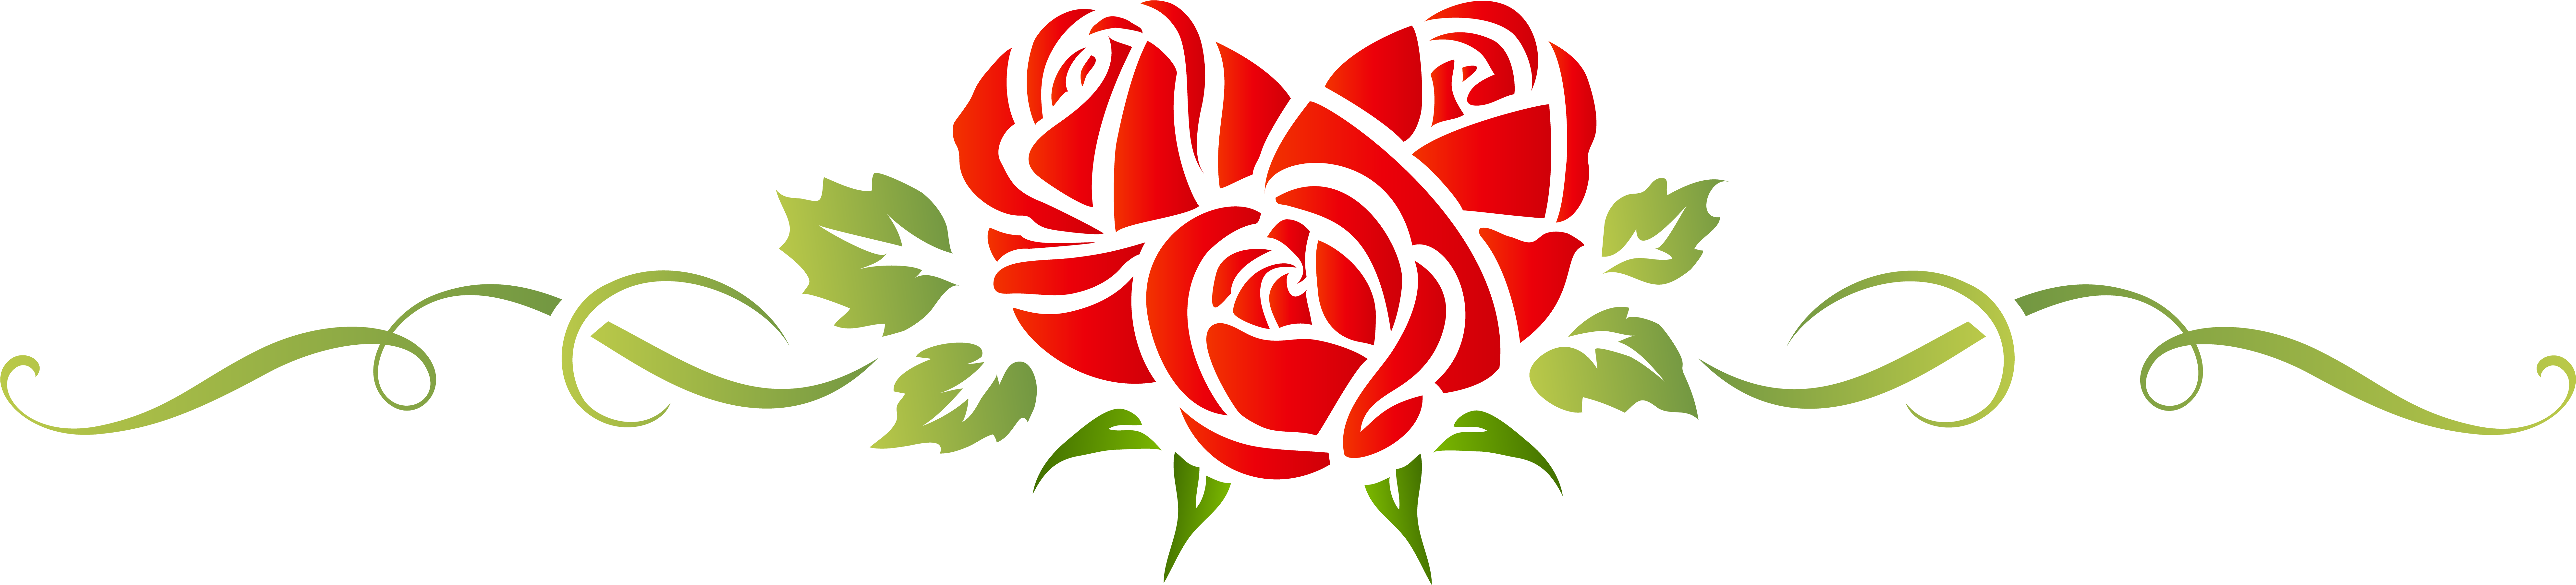 Red Rose Floral Ornament PNG